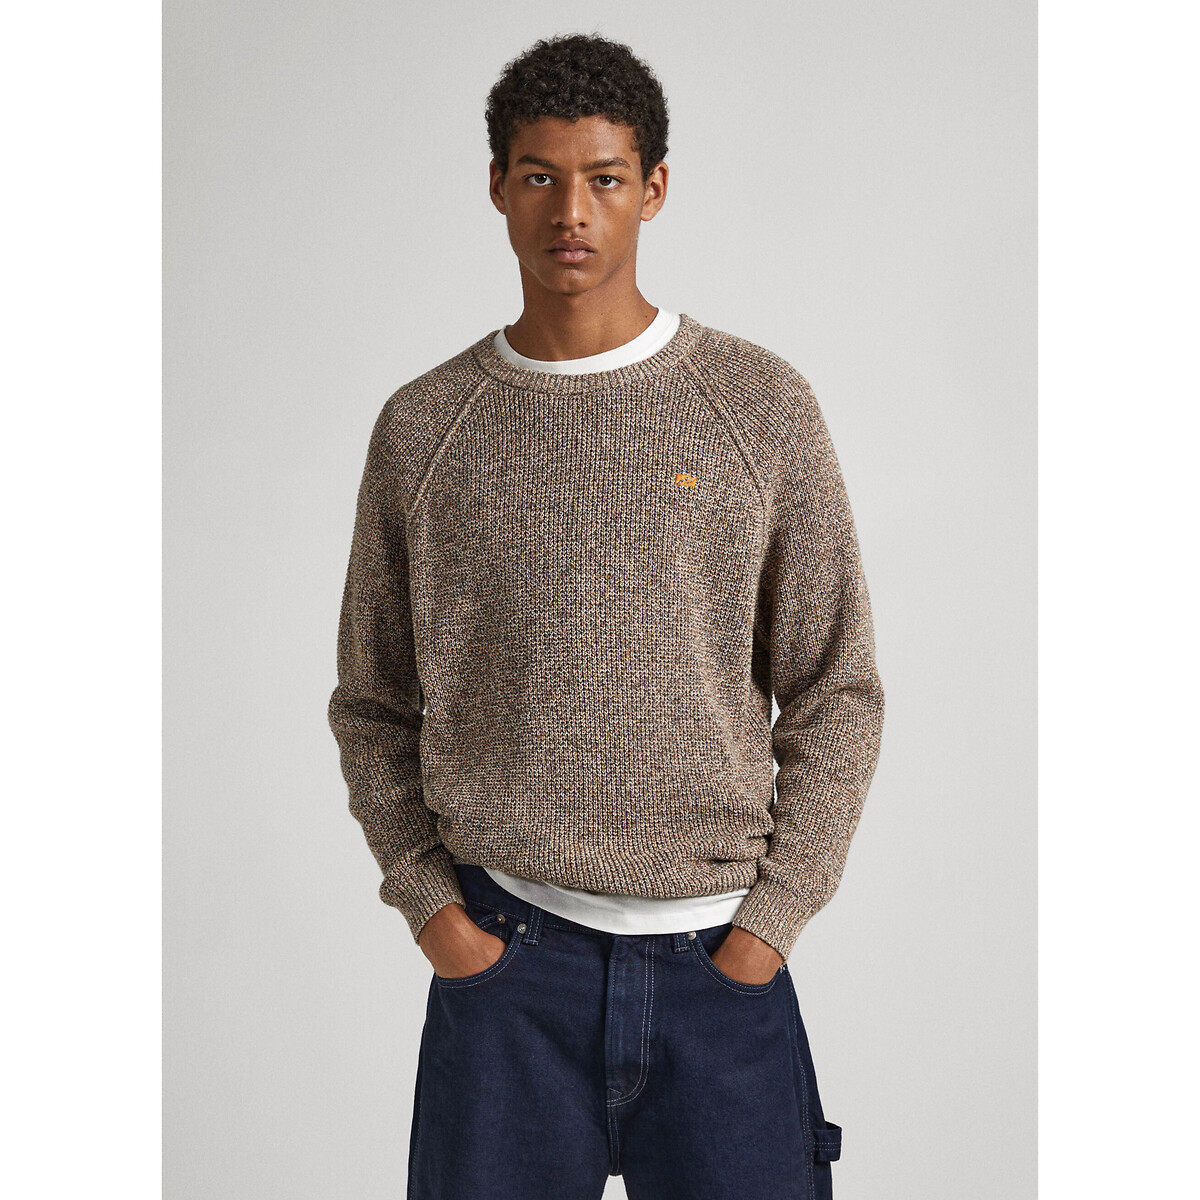 Cotton stranded knit jumper/sweater with crew neck beige Pepe